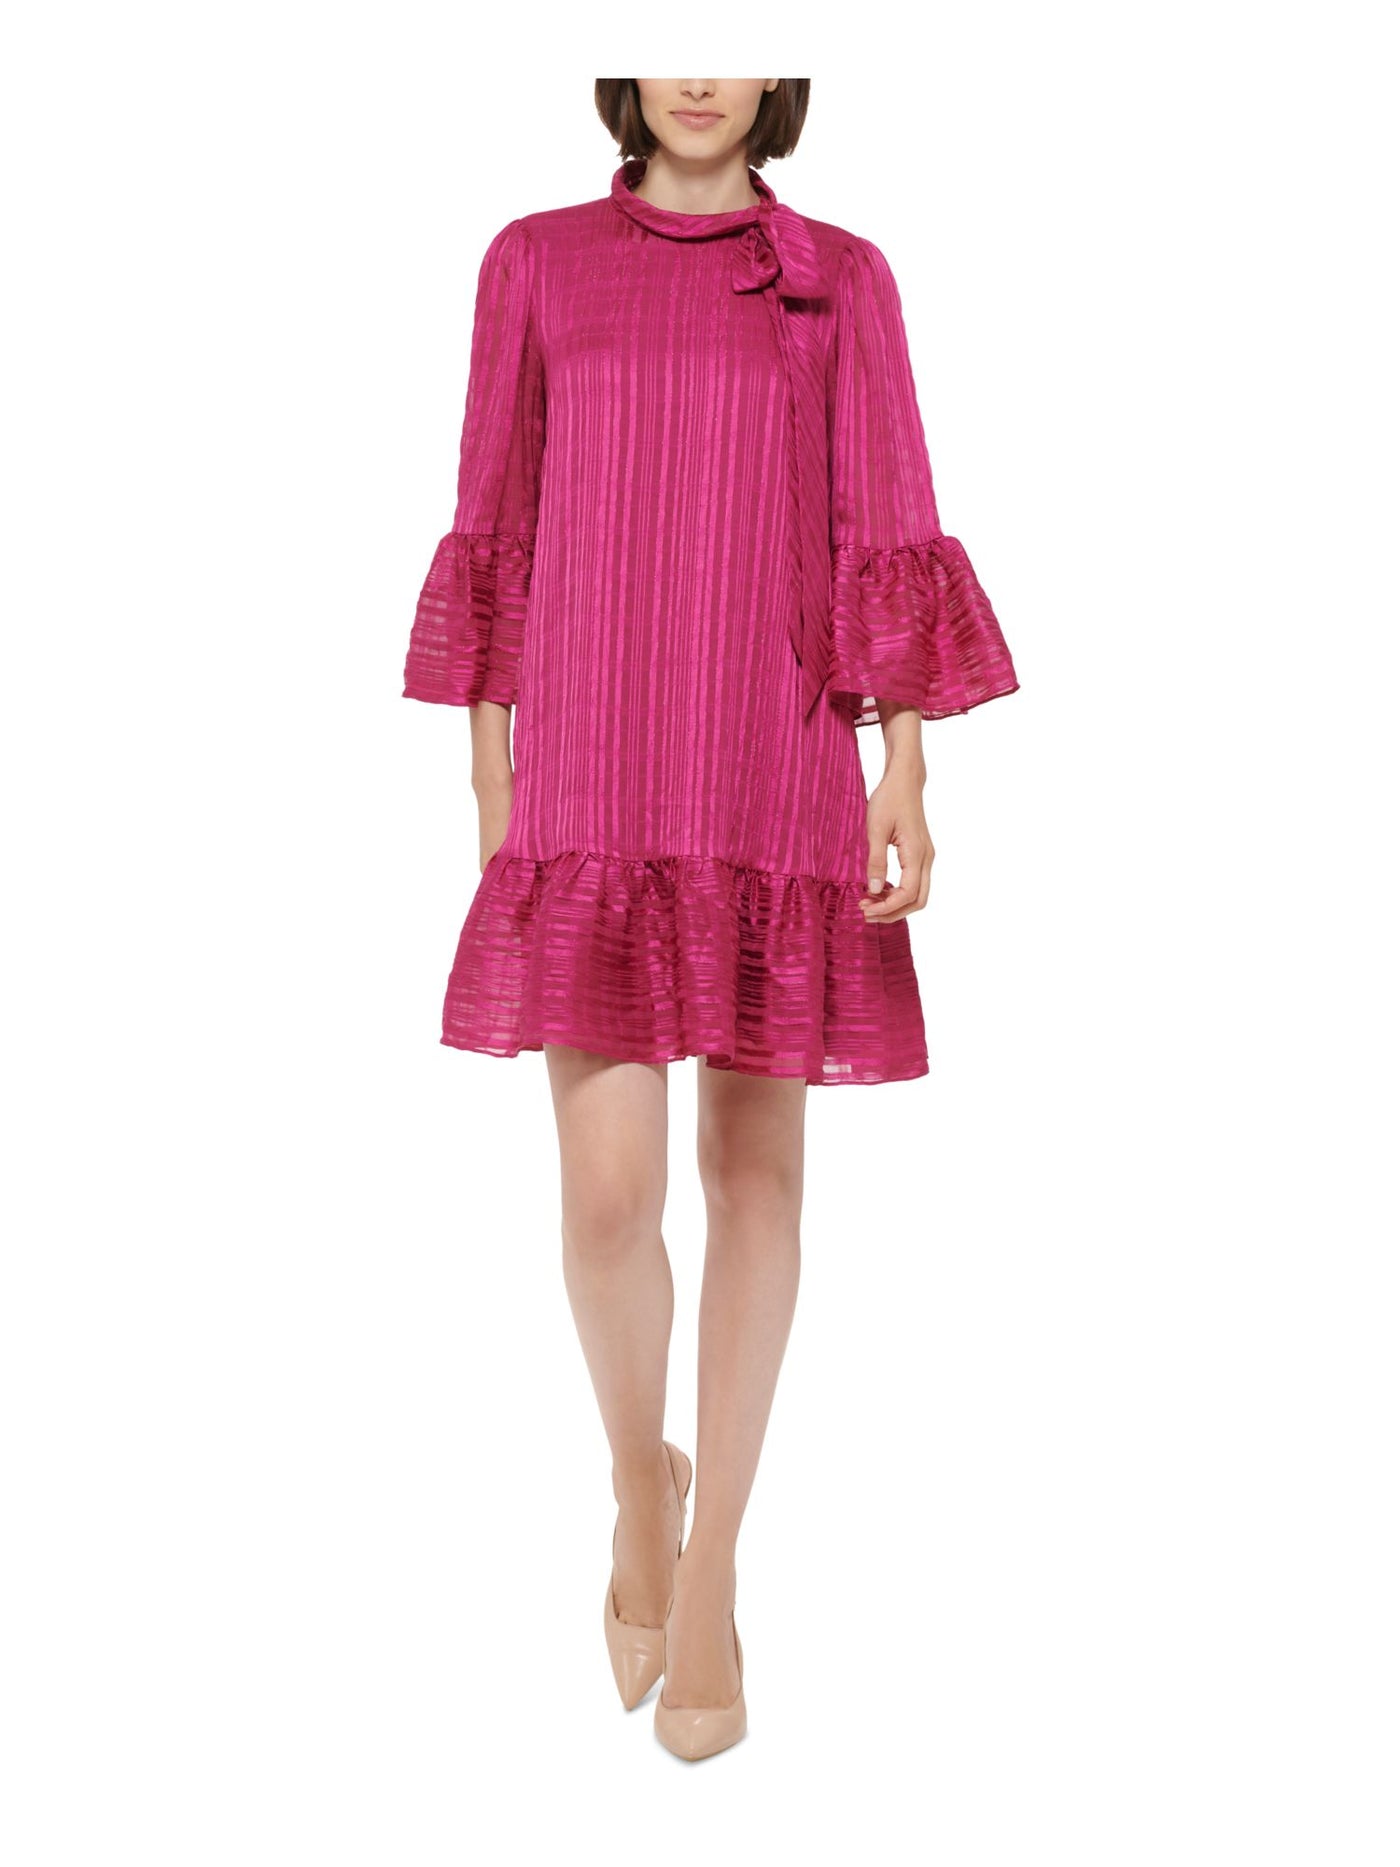 CALVIN KLEIN Womens Pink Striped Bell Sleeve Tie Neck Above The Knee Cocktail Shift Dress 4